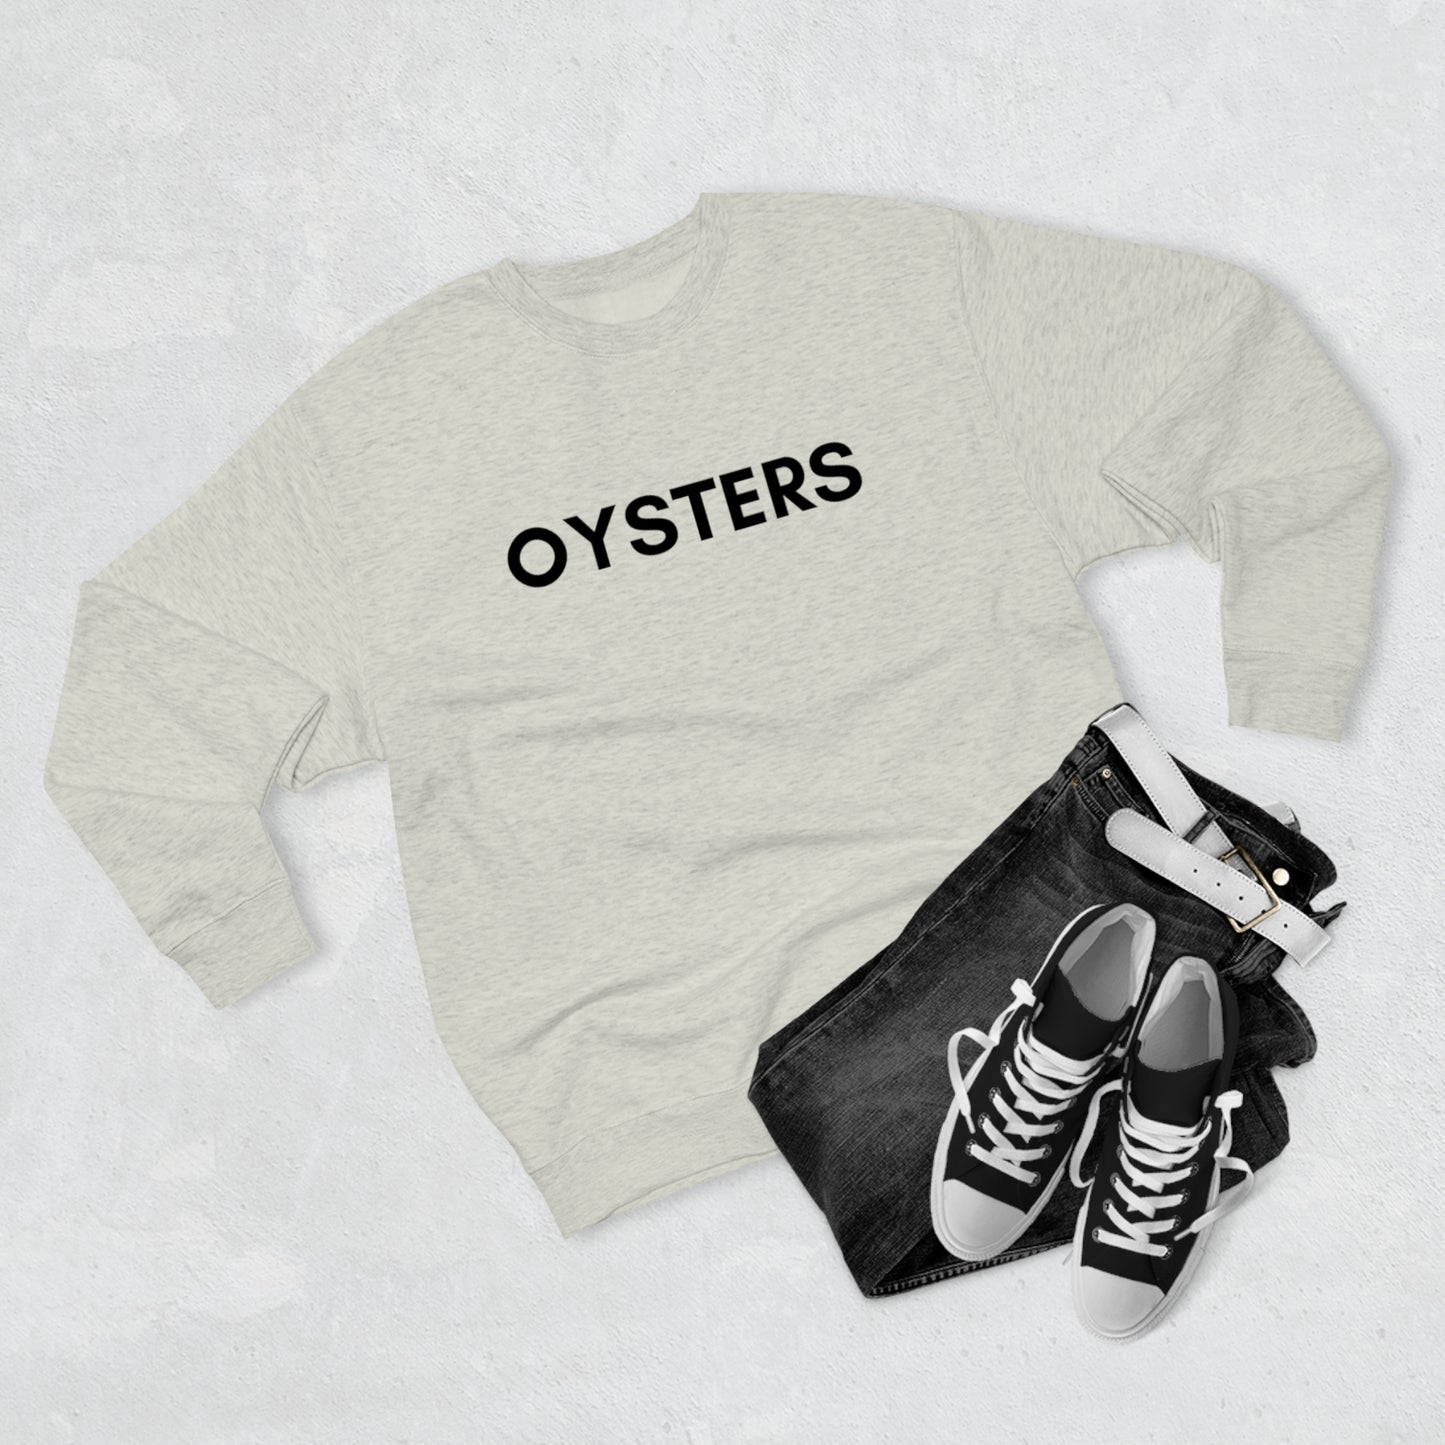 White Oyster Crew Neck Sweater